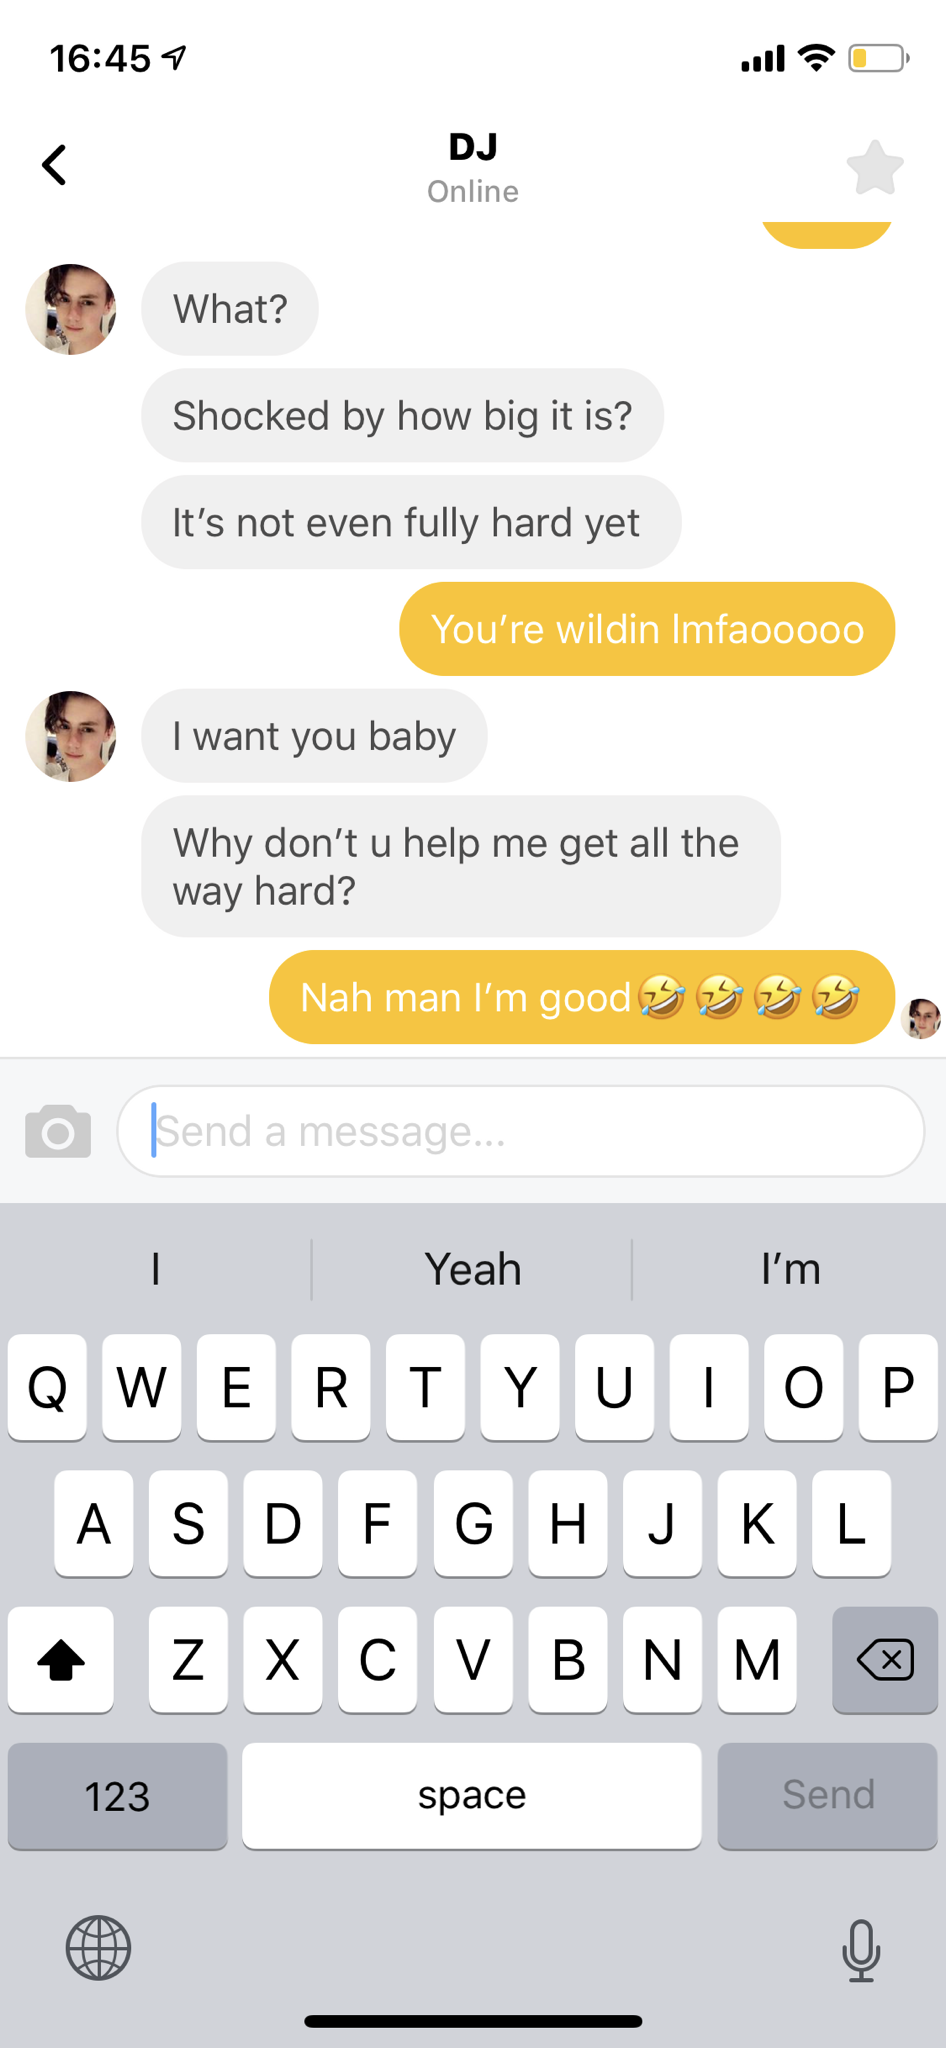 Super Desperate Dude Sends Unsolicited Dick Pic and Then Gets Trolled Into Oblivion